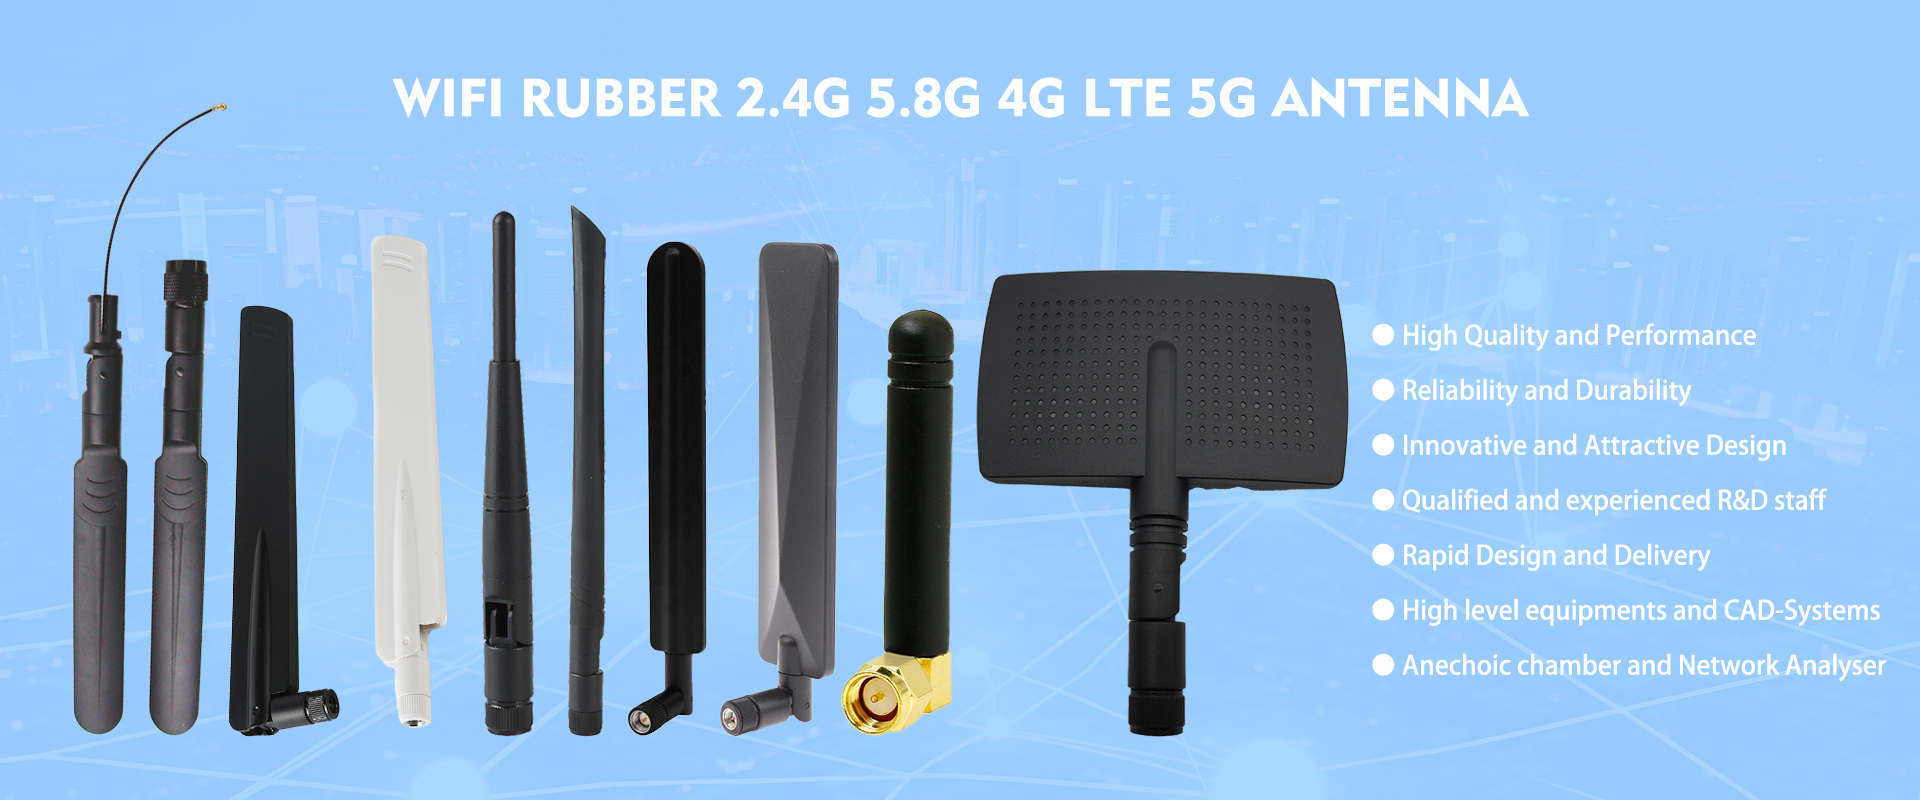 WIFI/GSM/3G/4G/5G/GPS antennas designer and manufacturer
WiFi(2.4&5.8G), LTE/3G/GSM, DVB-T, GPS, NFC, 433MHz, 868MHz, 915MHz Lora, RFID antenna;
I-PEX,SMA,N,MCX,MMCX,F,TNC RF Cable Assembly;
RF connector Series: SMA,SMB,F,PAL,N,MMCX,MCX connector